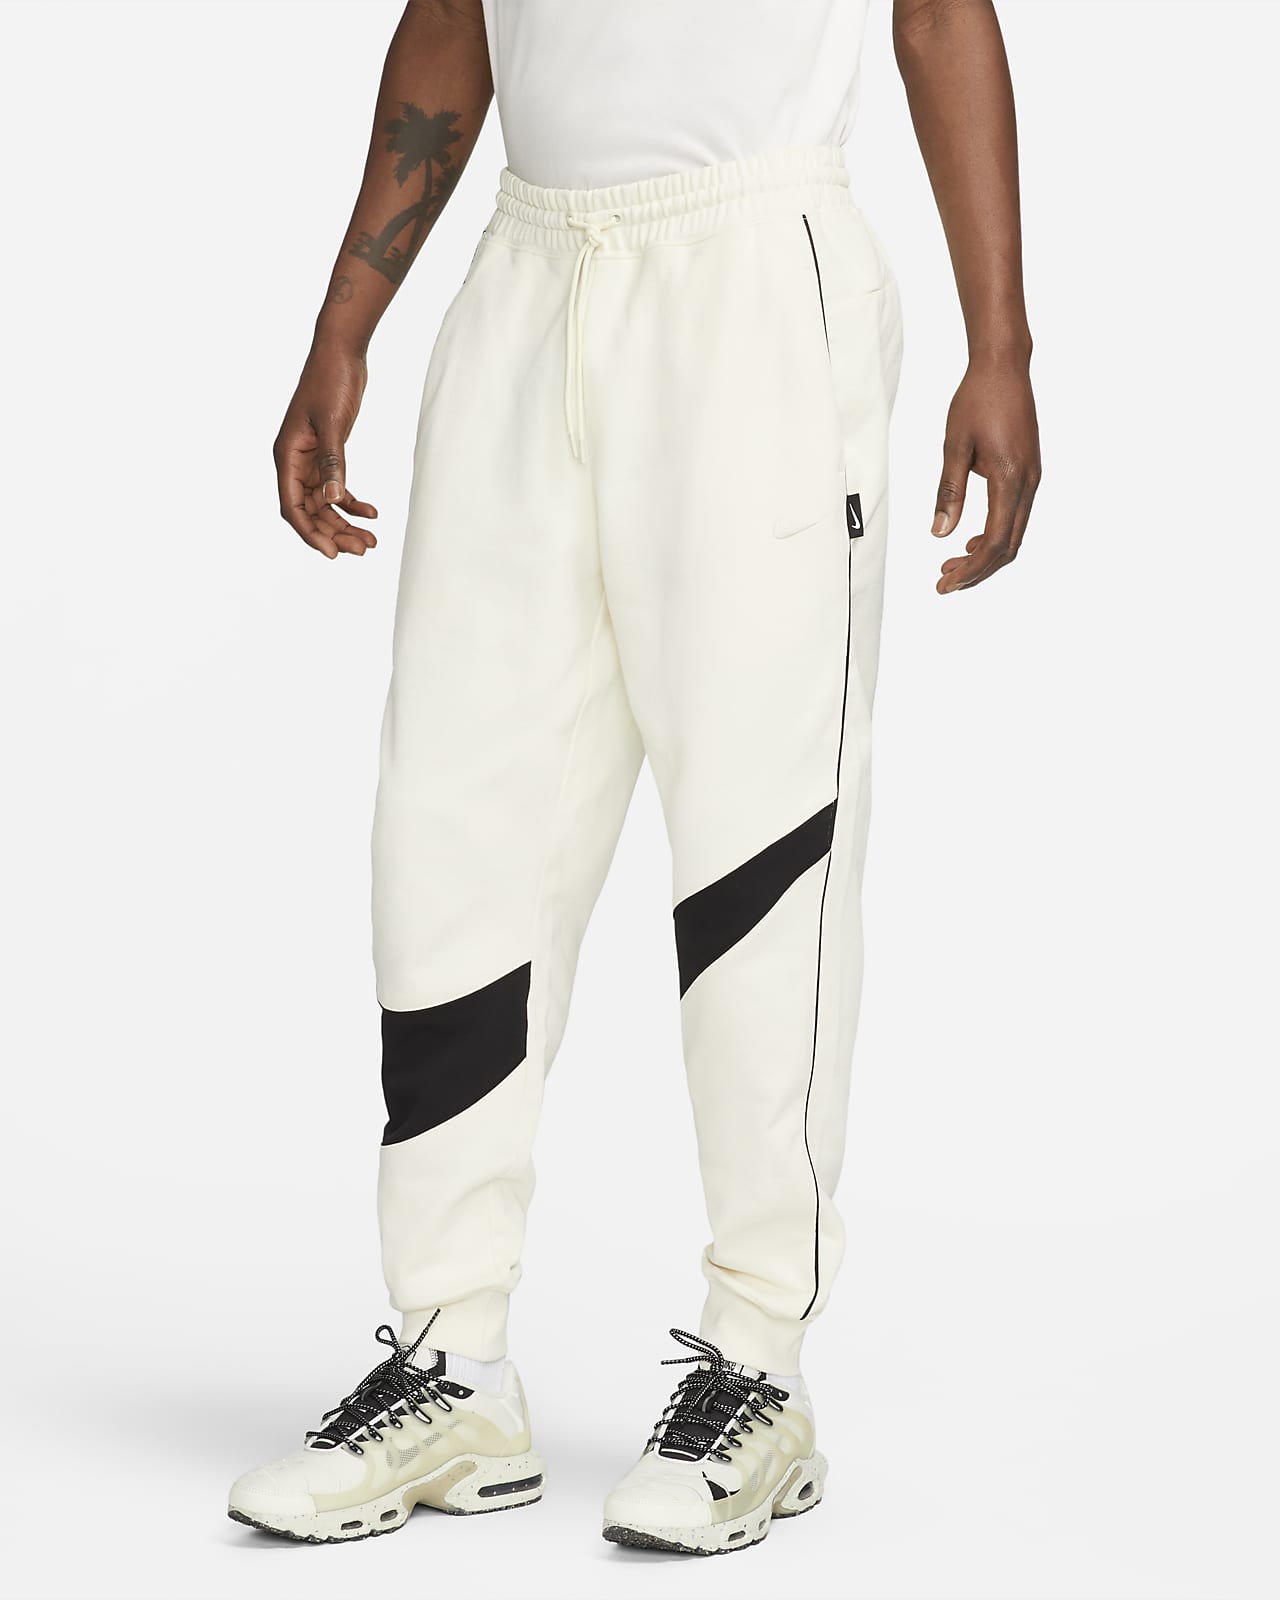 Mens New Nike Air Tracksuit Woven Cuffed Bottoms Joggers Track Pants  Trousers | eBay